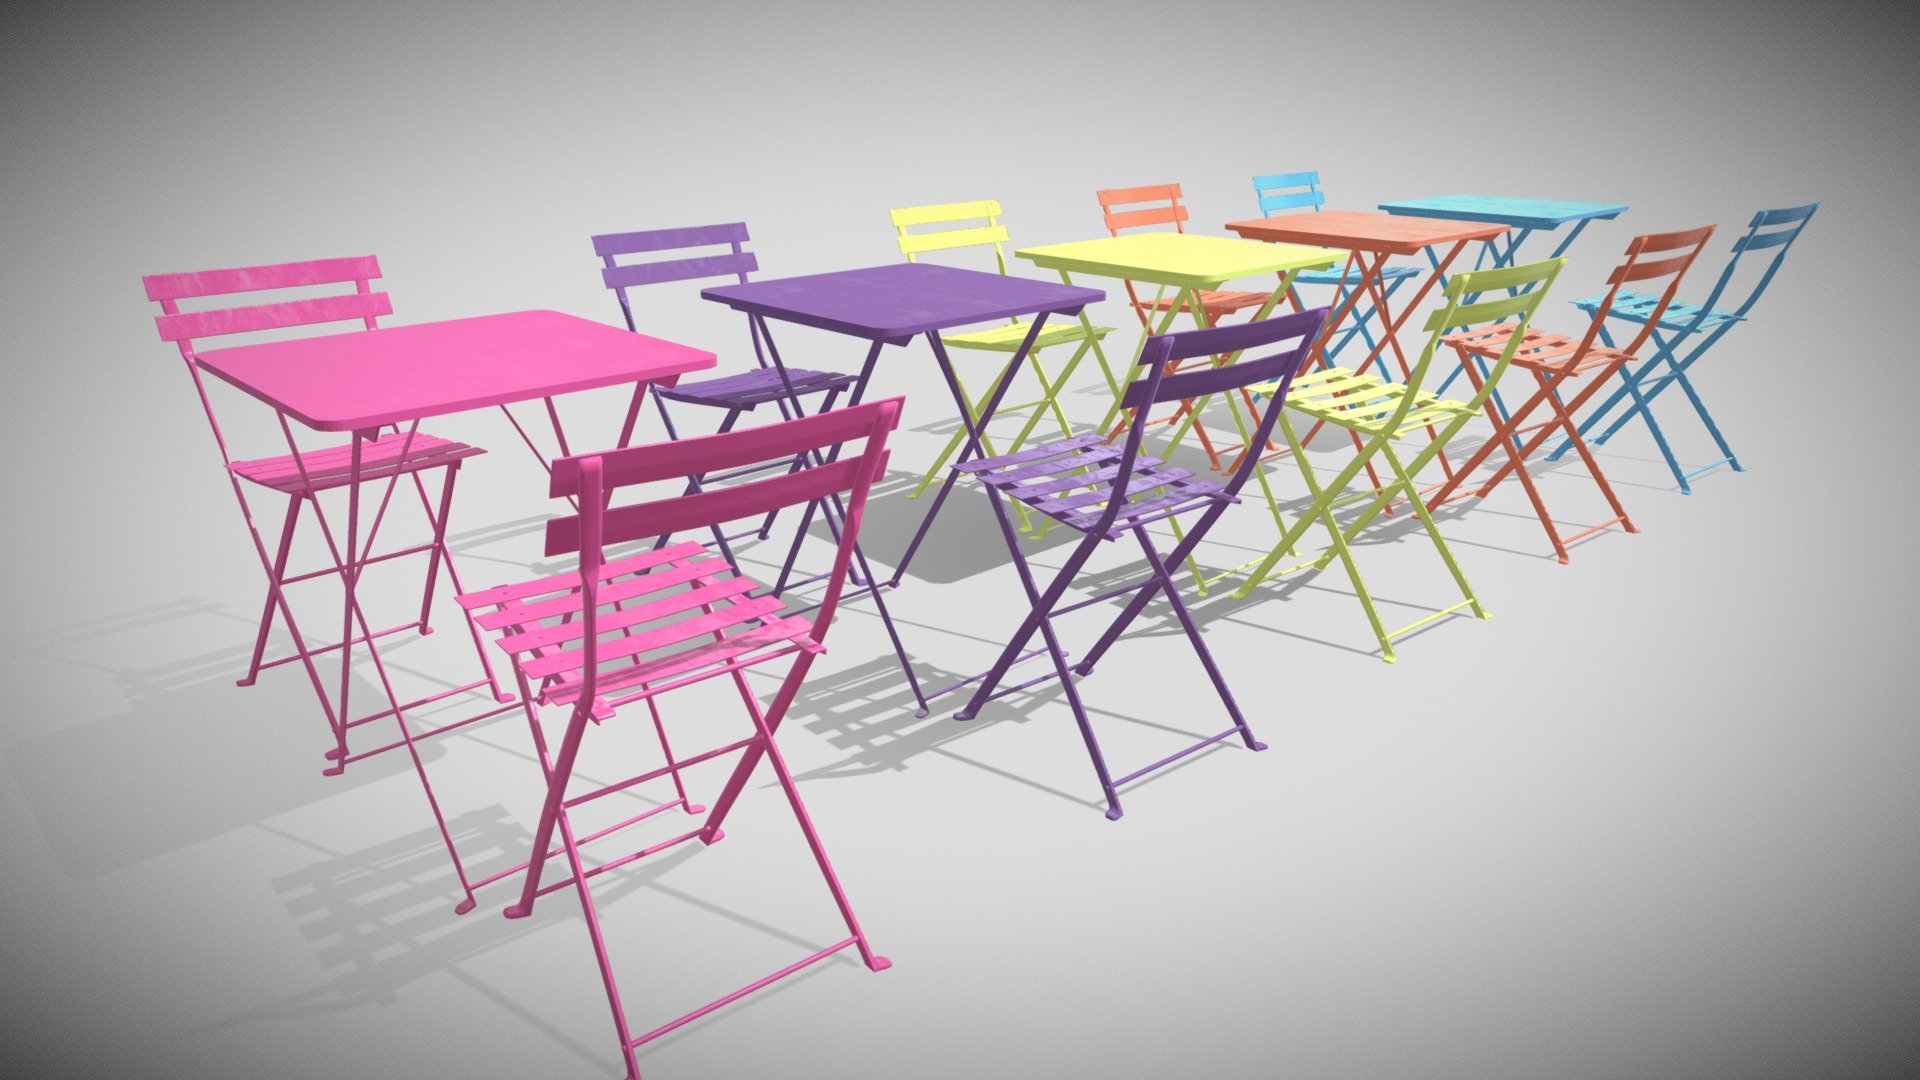 Here it is the Bistro collection of tables and chairs inspired by FERMOB. Do you know that this kind of folding furnitures was created at the end of the 19th century? It seems to be so frenchy but you can find the same on Time Square in NYC! 

In this pack you will have 5 tables and 10 chairs (15 elements) in 5 colors :
- &ldquo;Anise